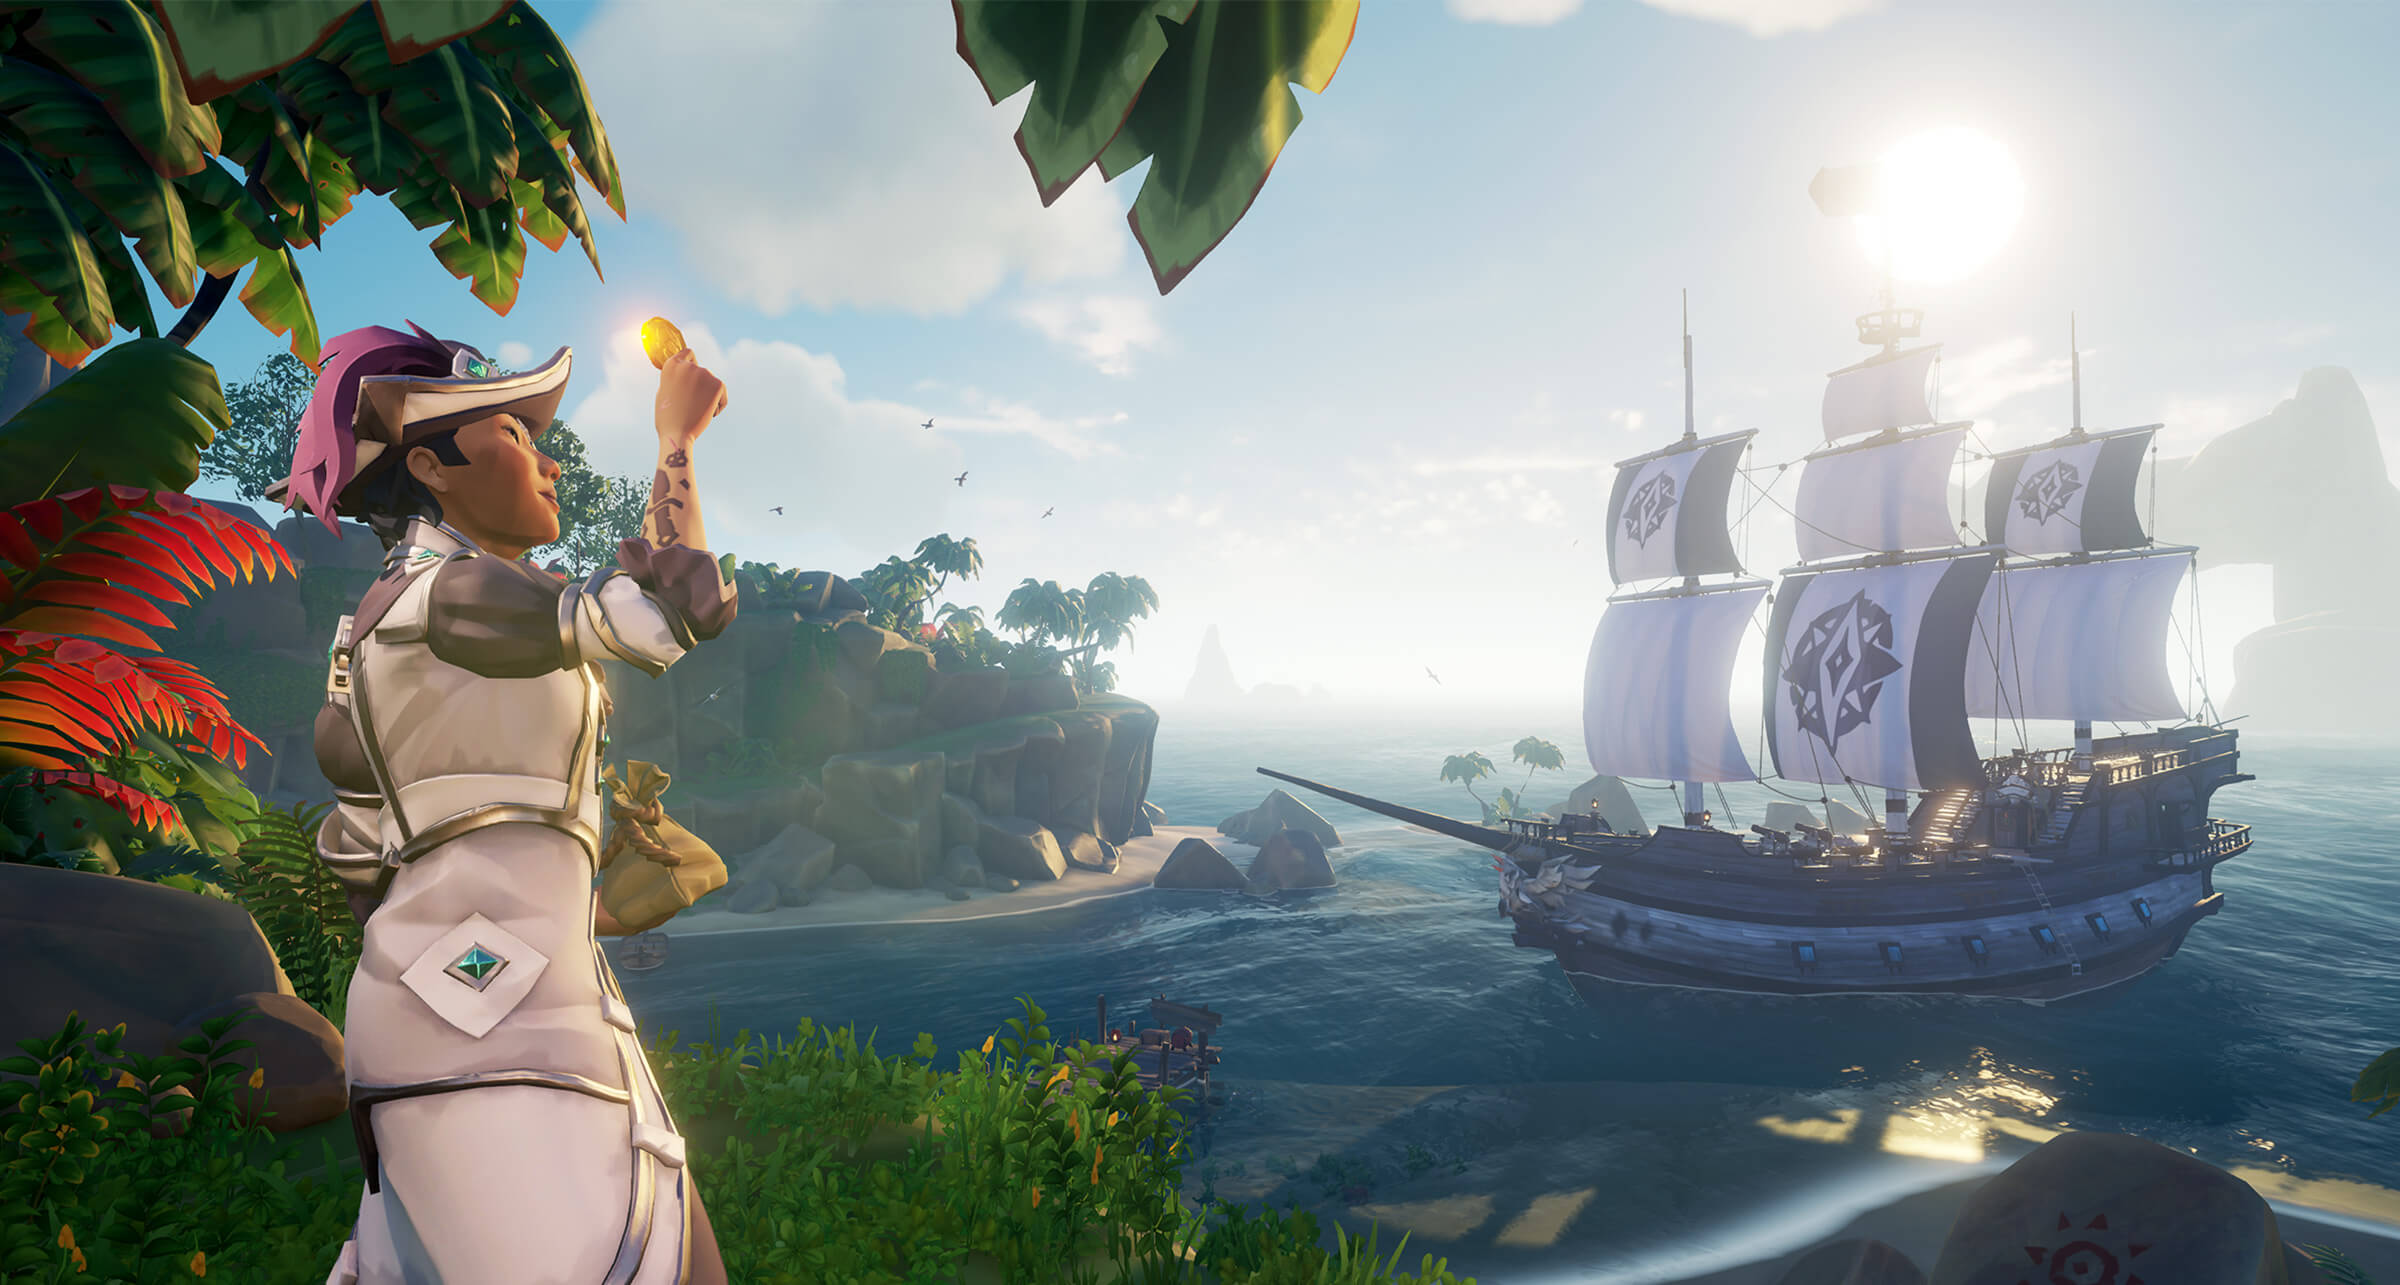 where do buy sea of thieves pc